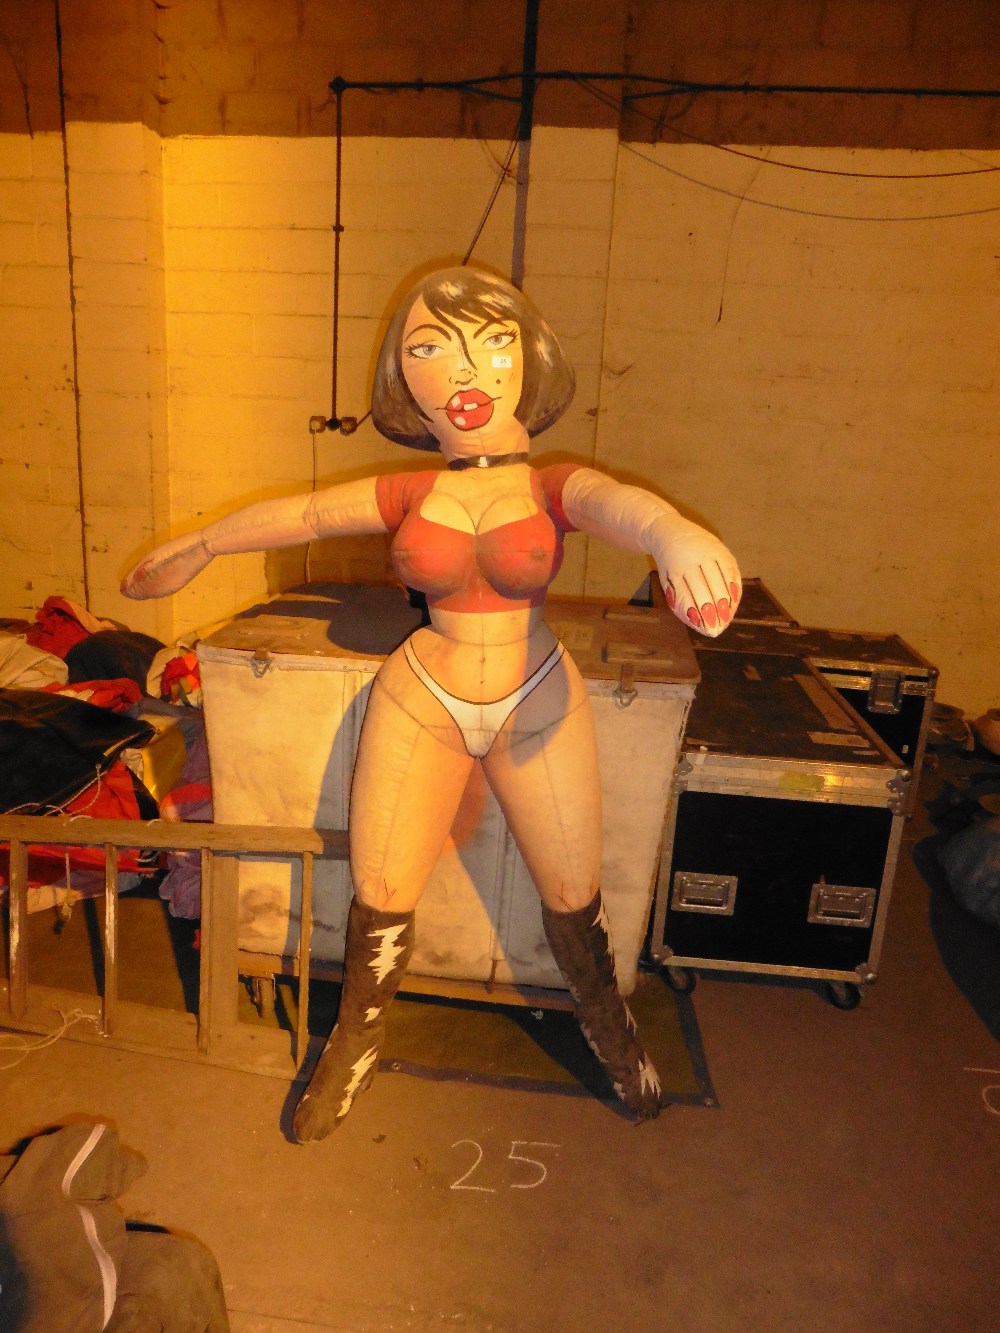 Inflatable doll made for Chubby Brown

5. - Image 2 of 3